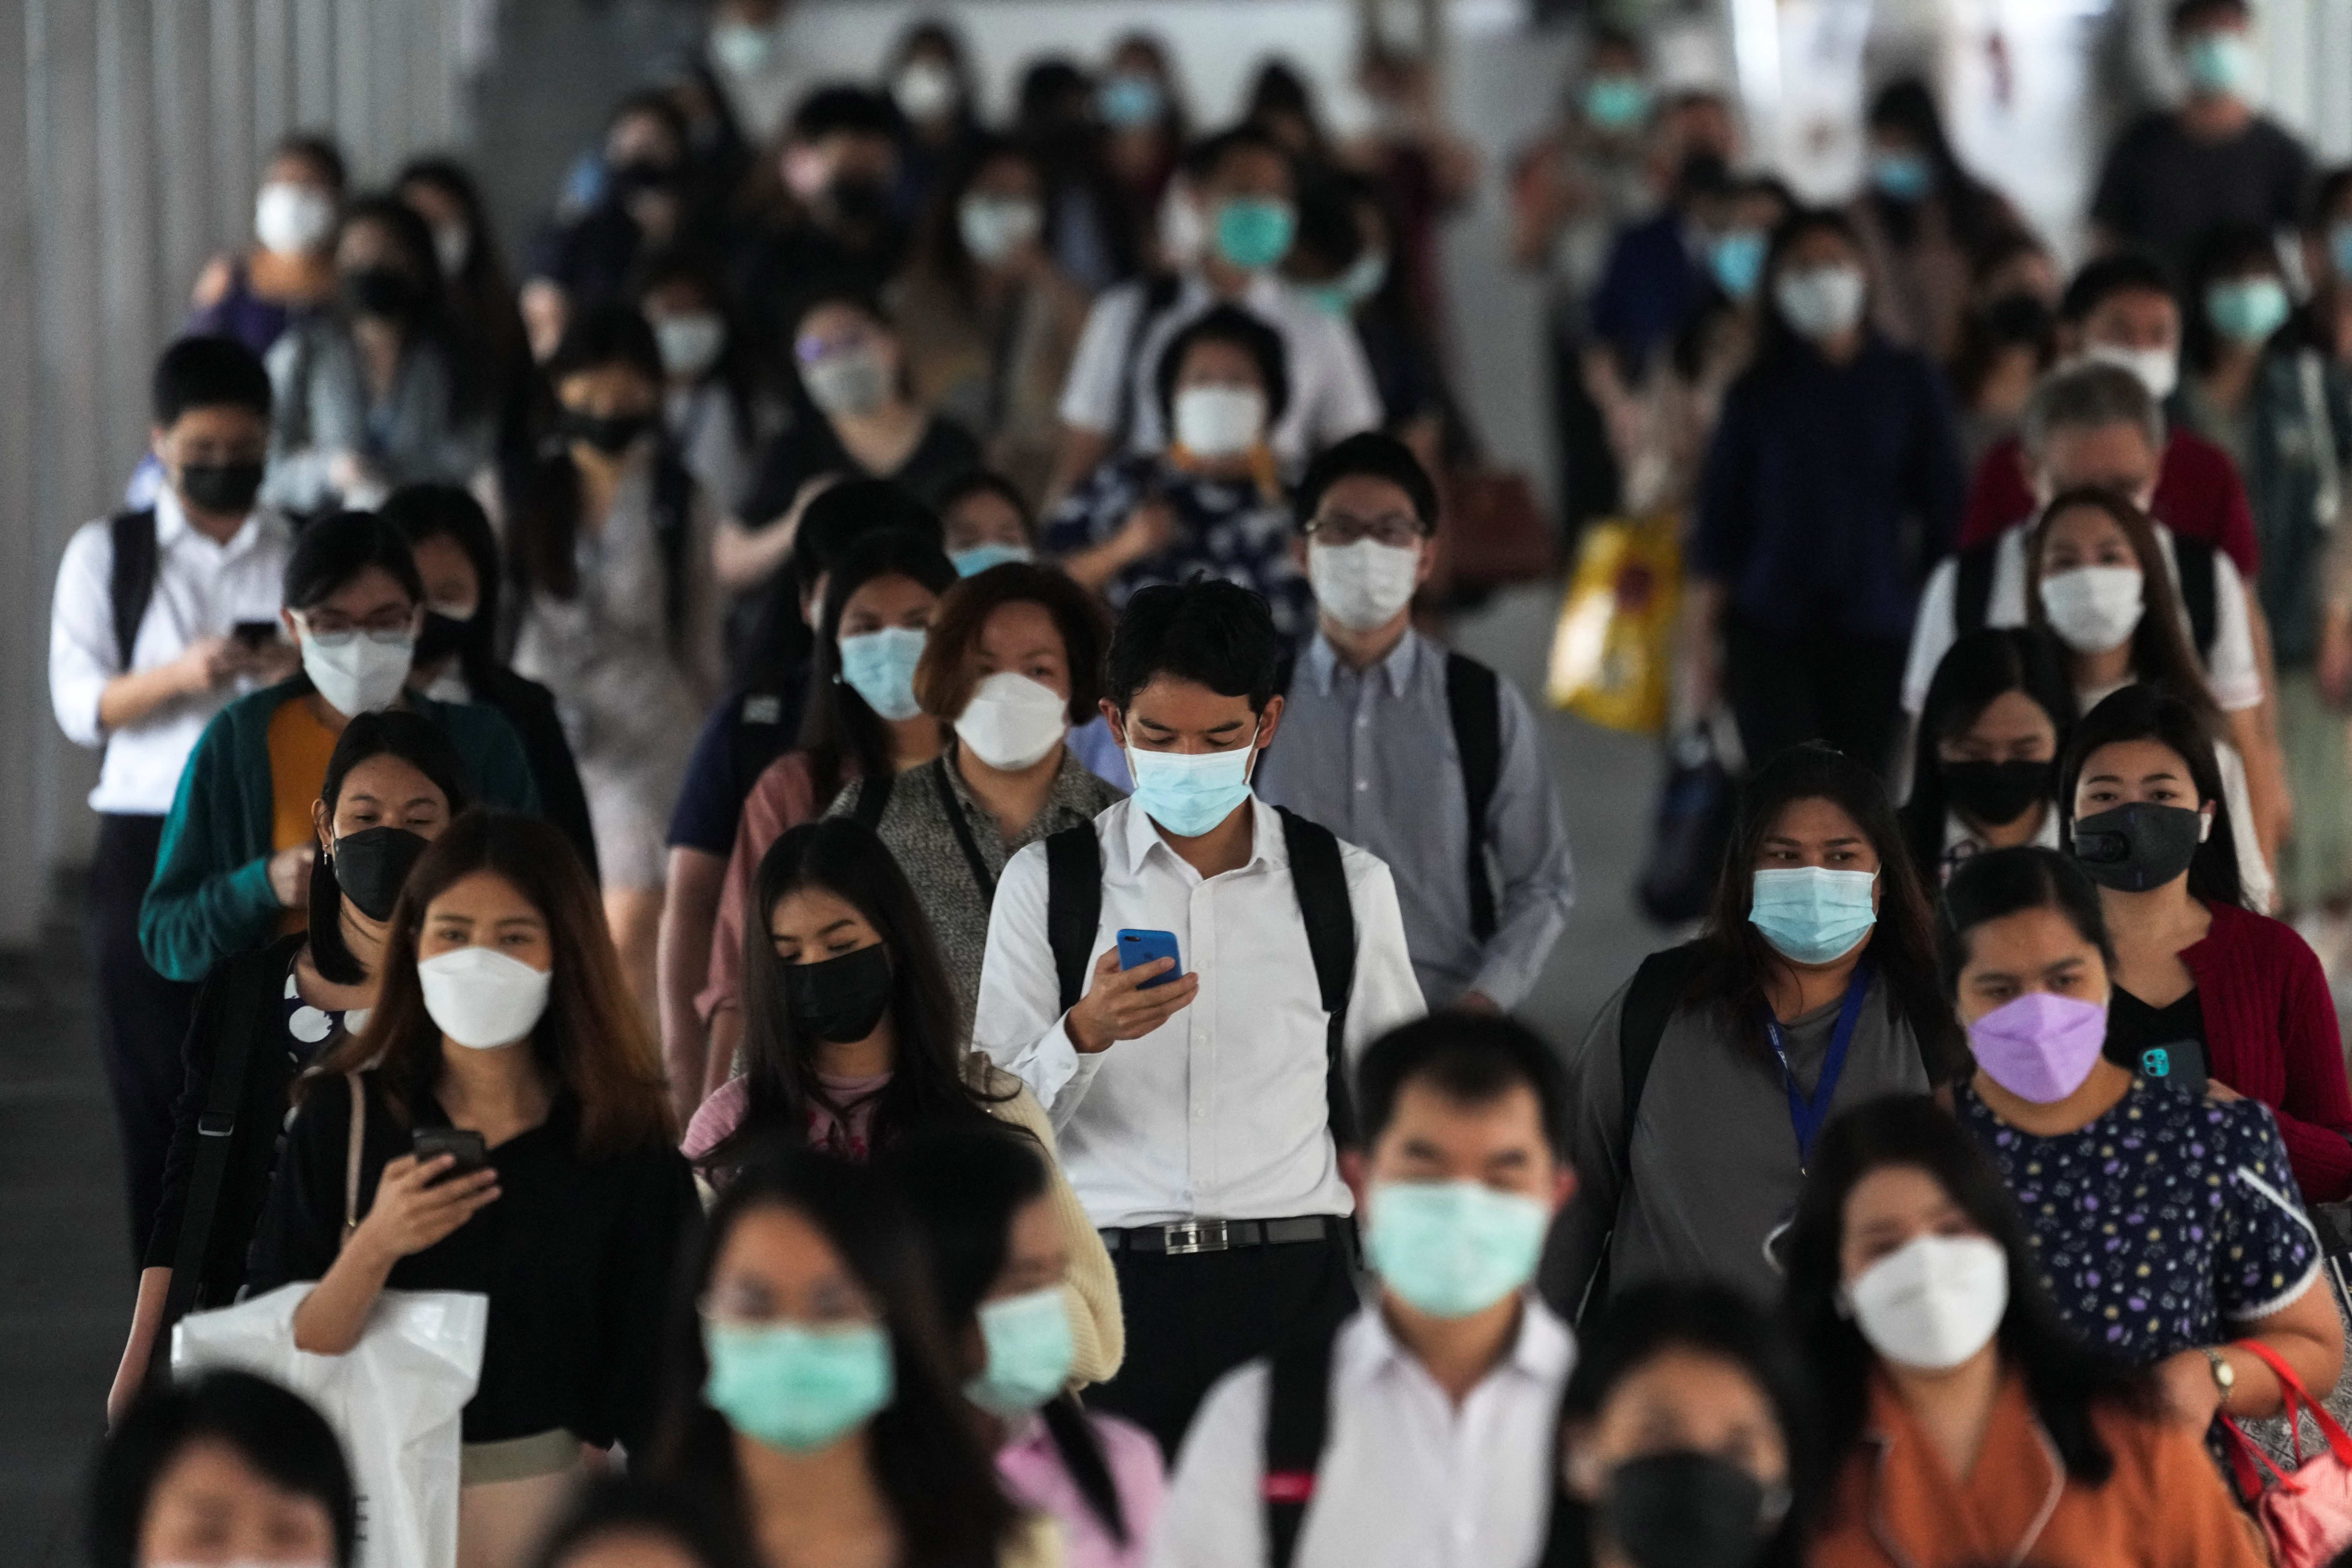 People wearing face masks as a measure to prevent the spread of the coronavirus disease (COVID-19) are seen at a train station in Bangkok, Thailand November 29, 2021. REUTERS/Athit Perawongmetha